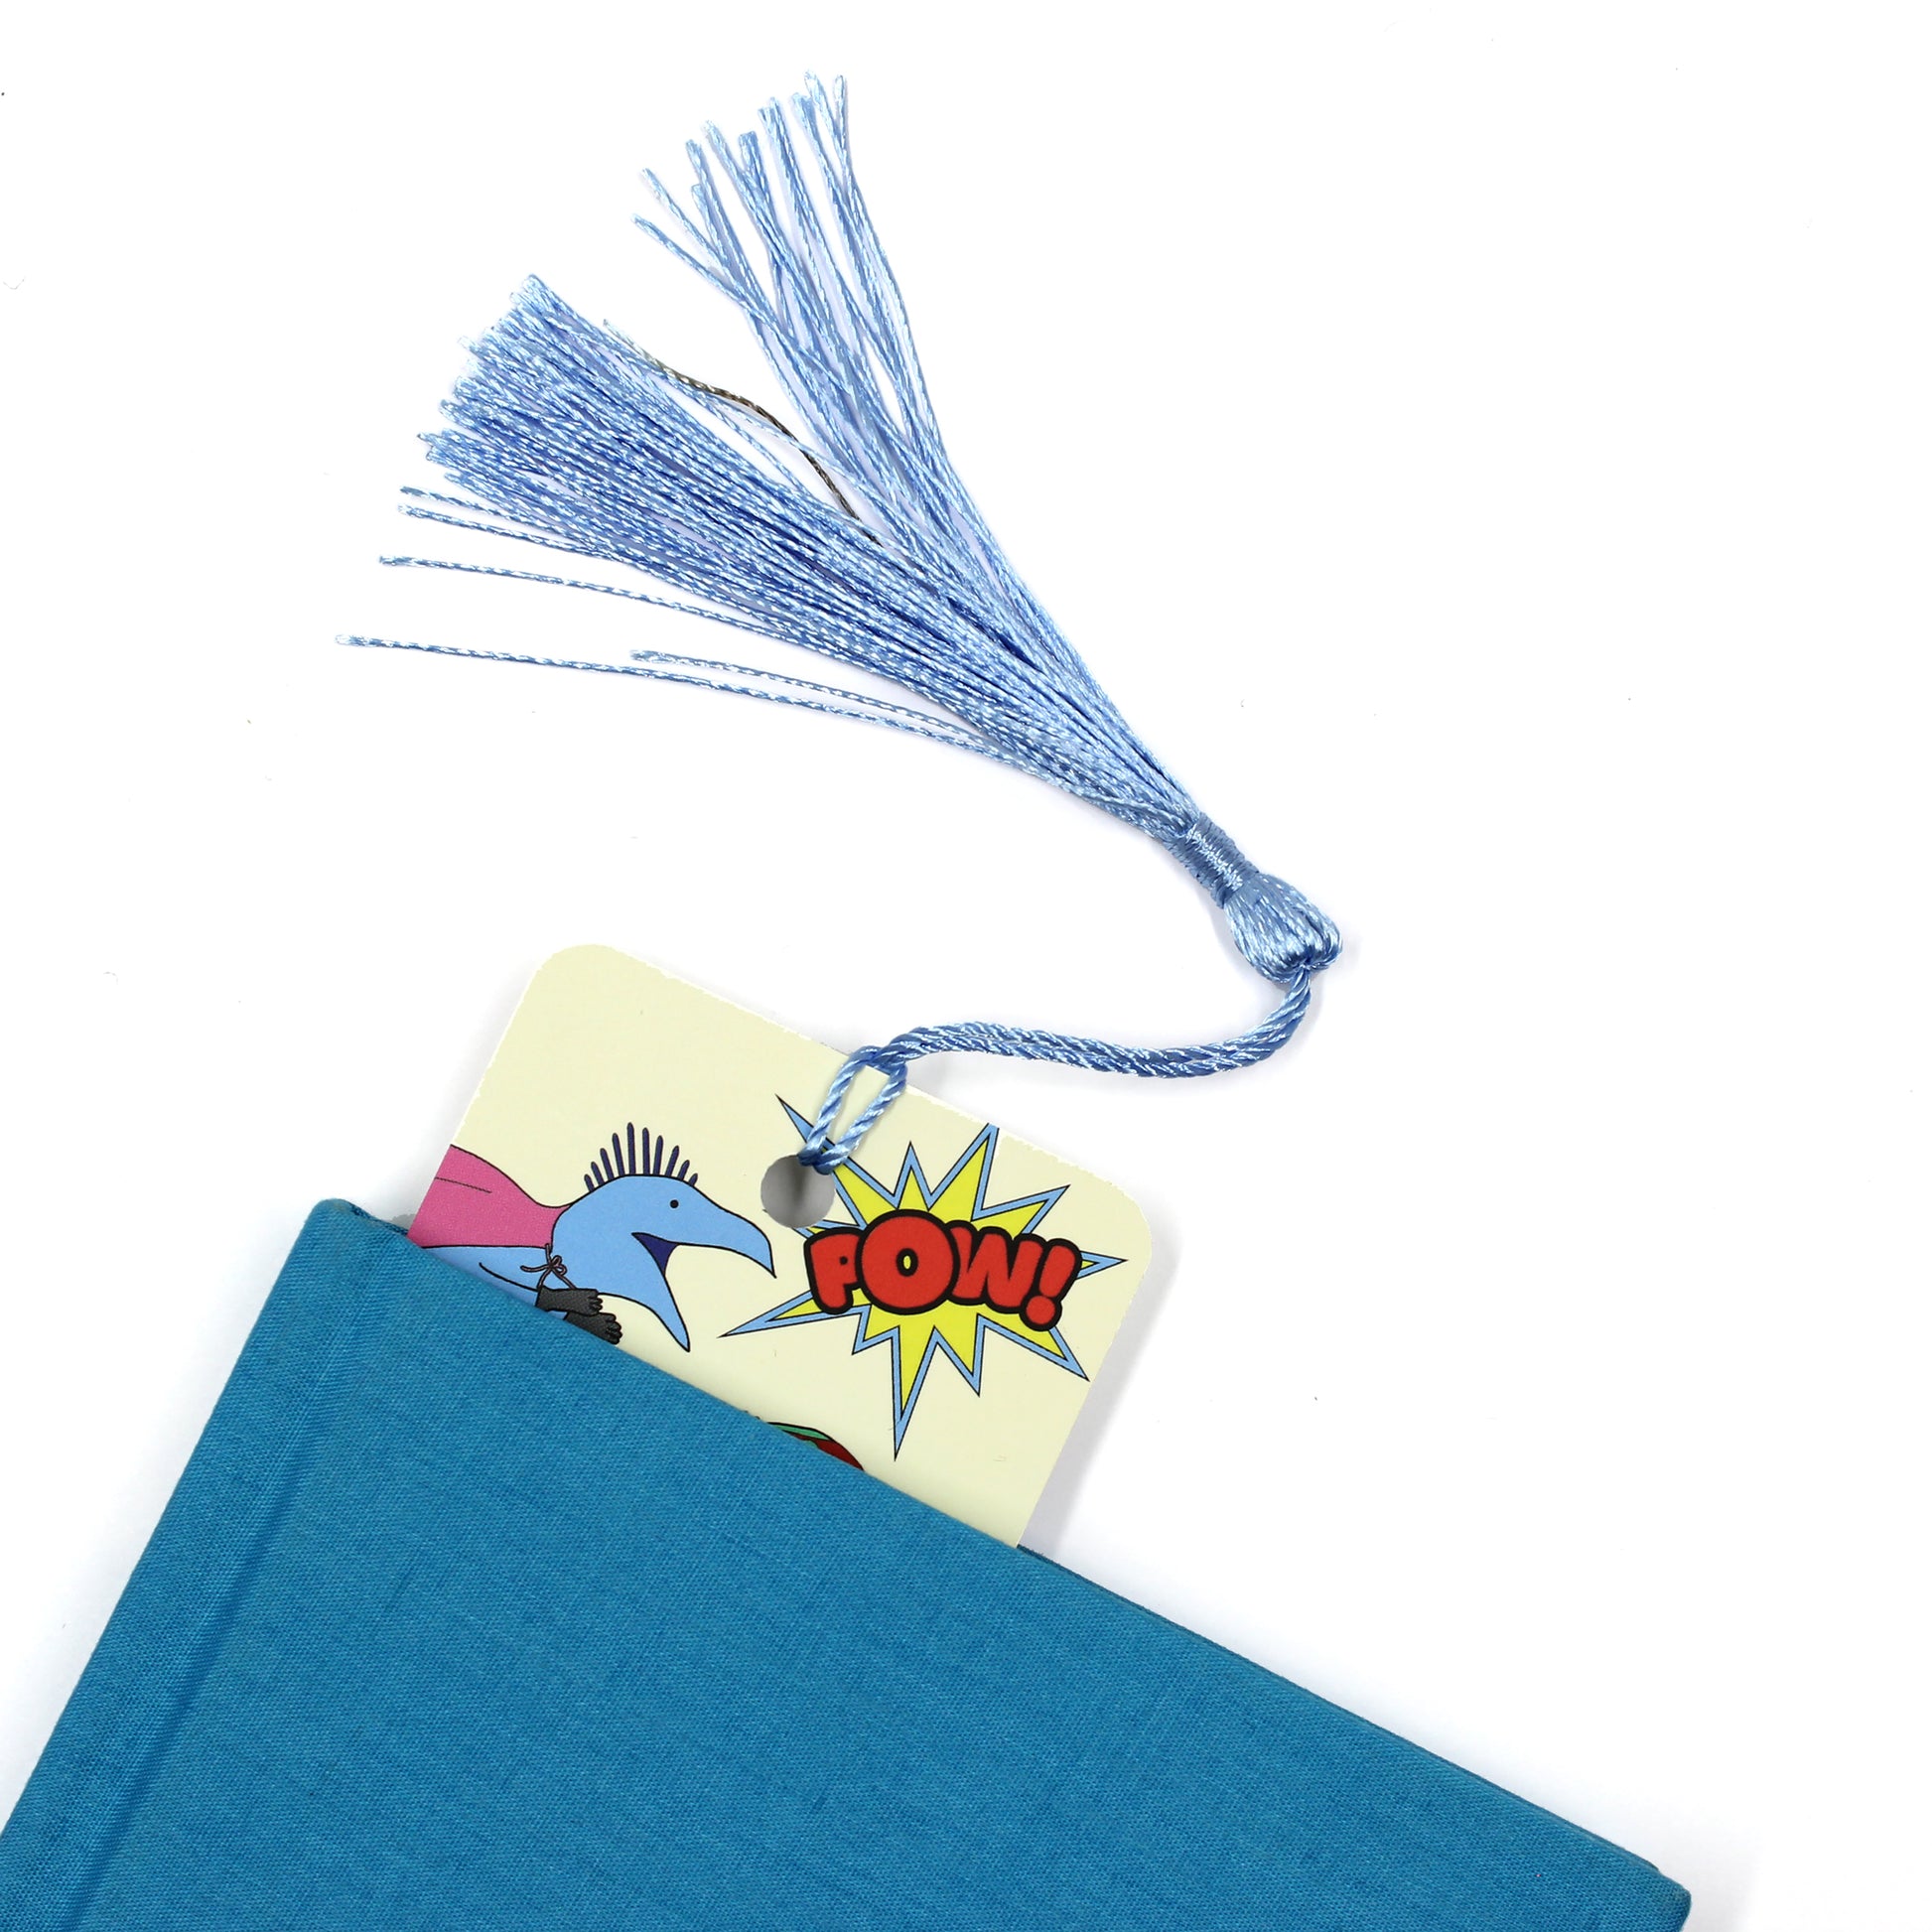 superhero dinosaur bookmark with blue tassel coming out of a blue book